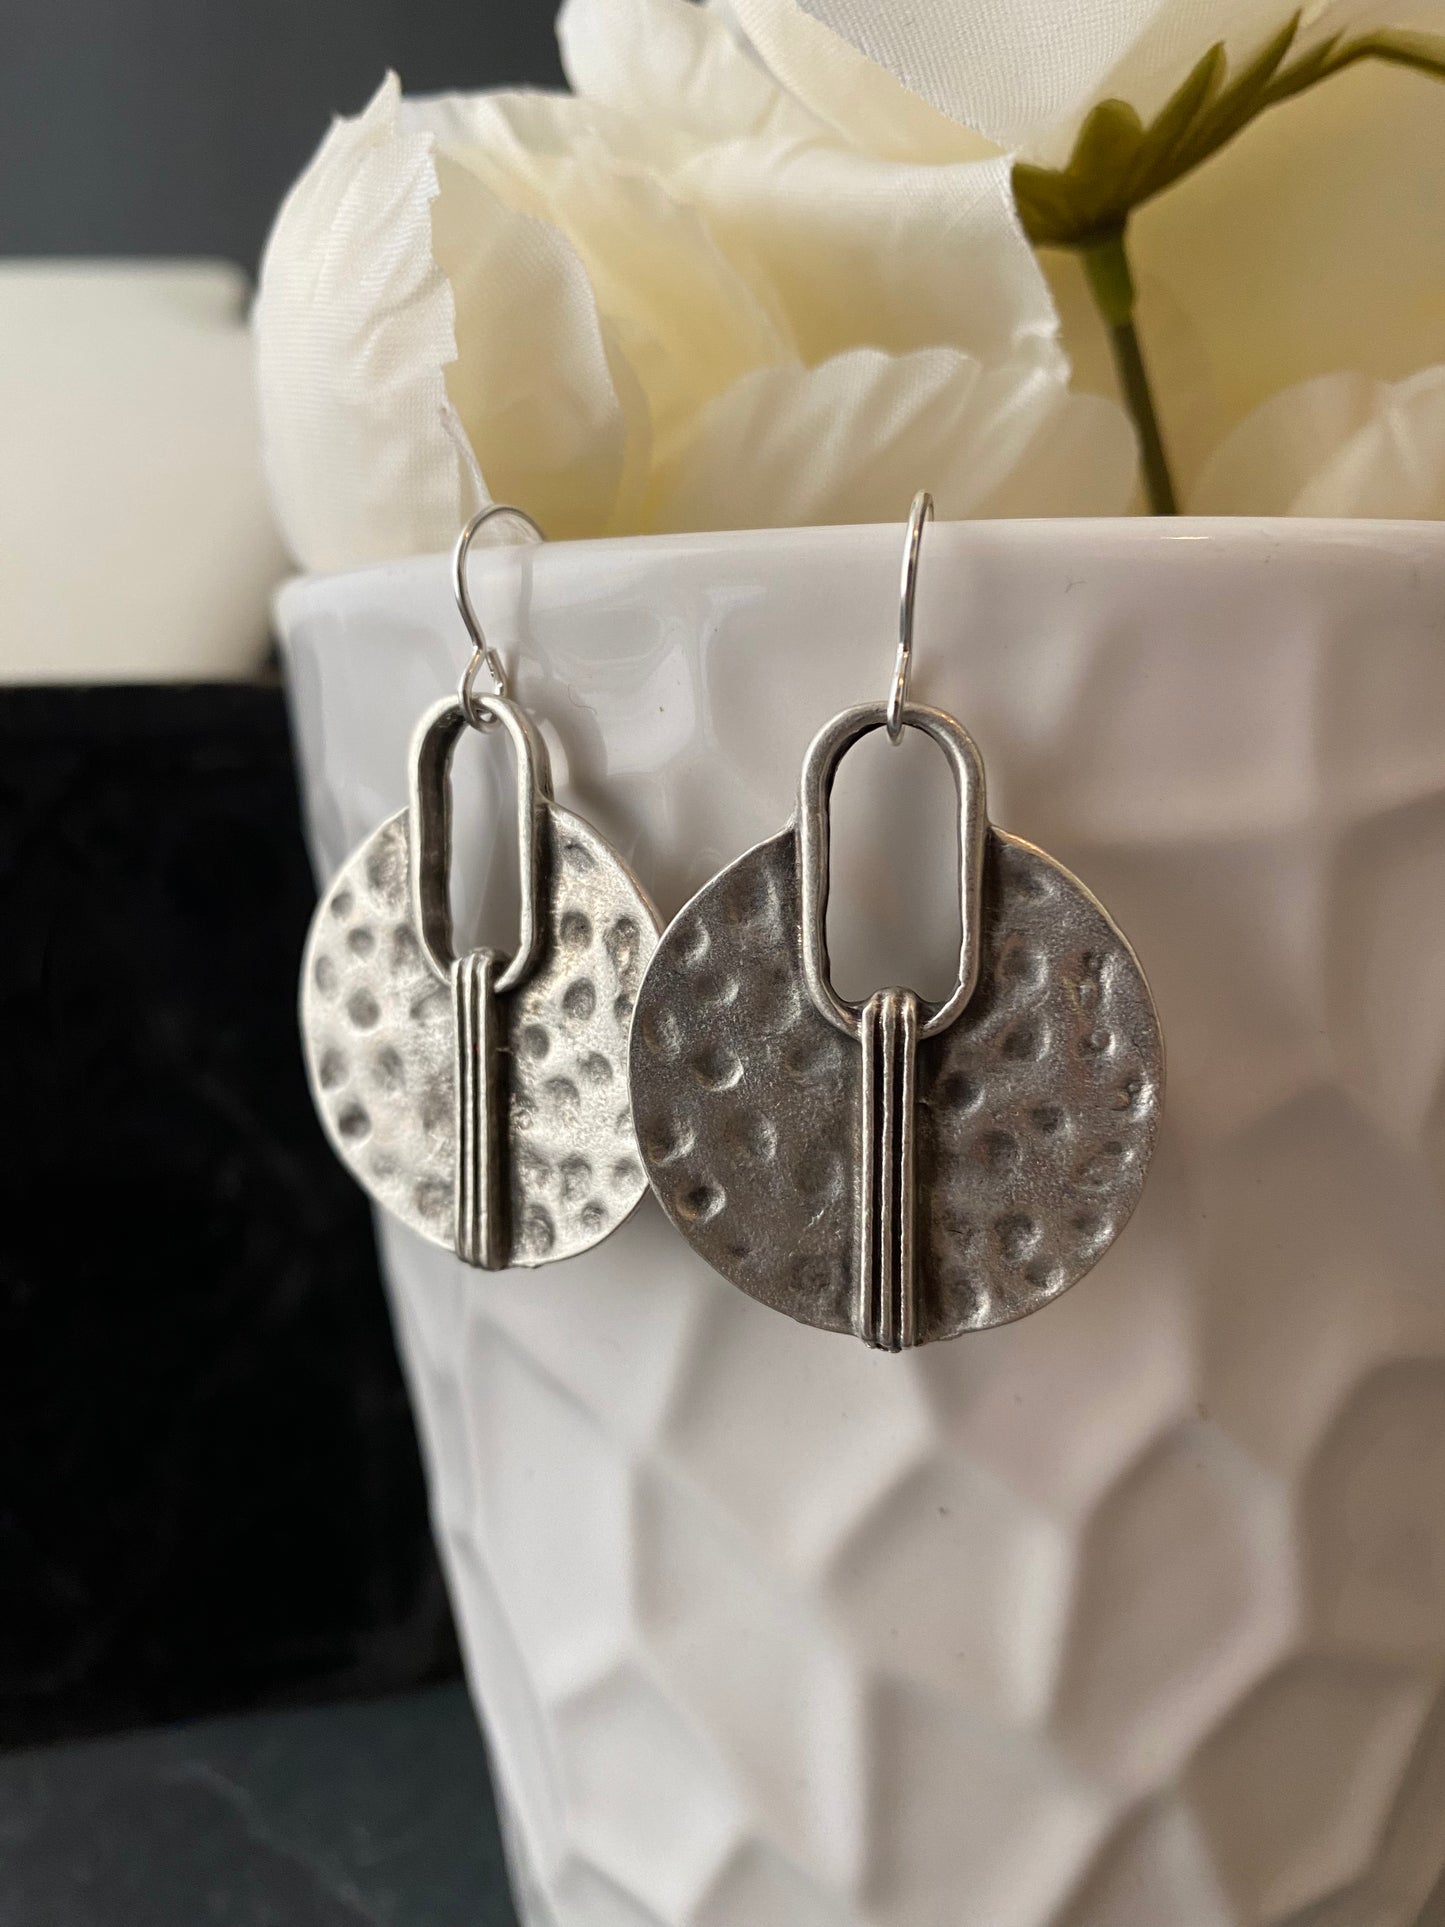 Sterling silver earrings, textured, modern, jewelry. - Andria Bieber Designs 